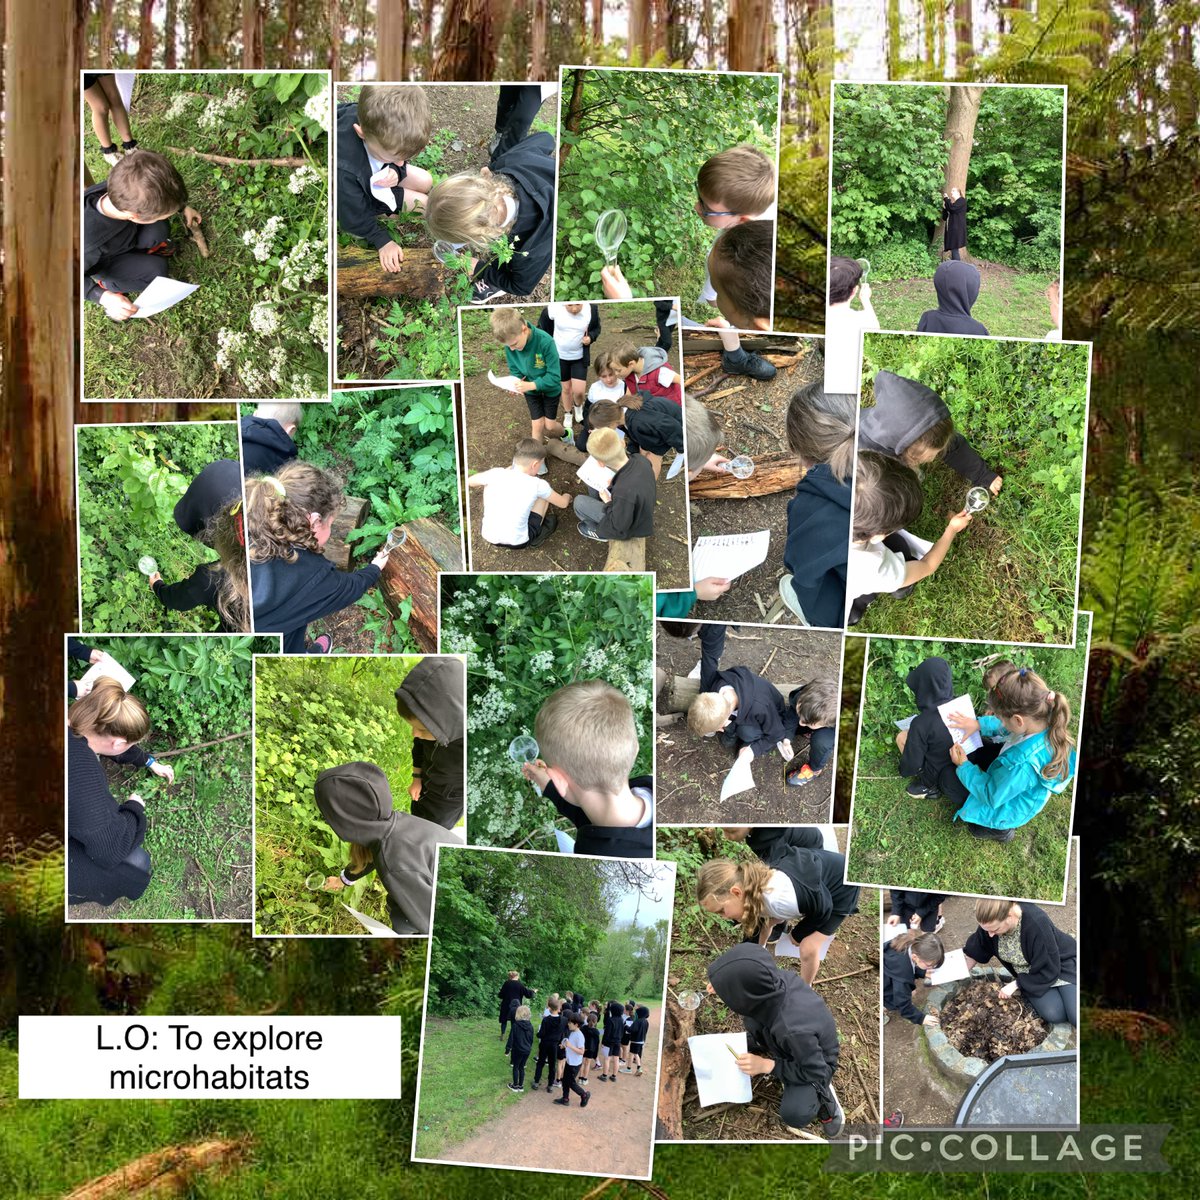 In science this afternoon class 5 have been exploring microhabitats.#lscpsscience